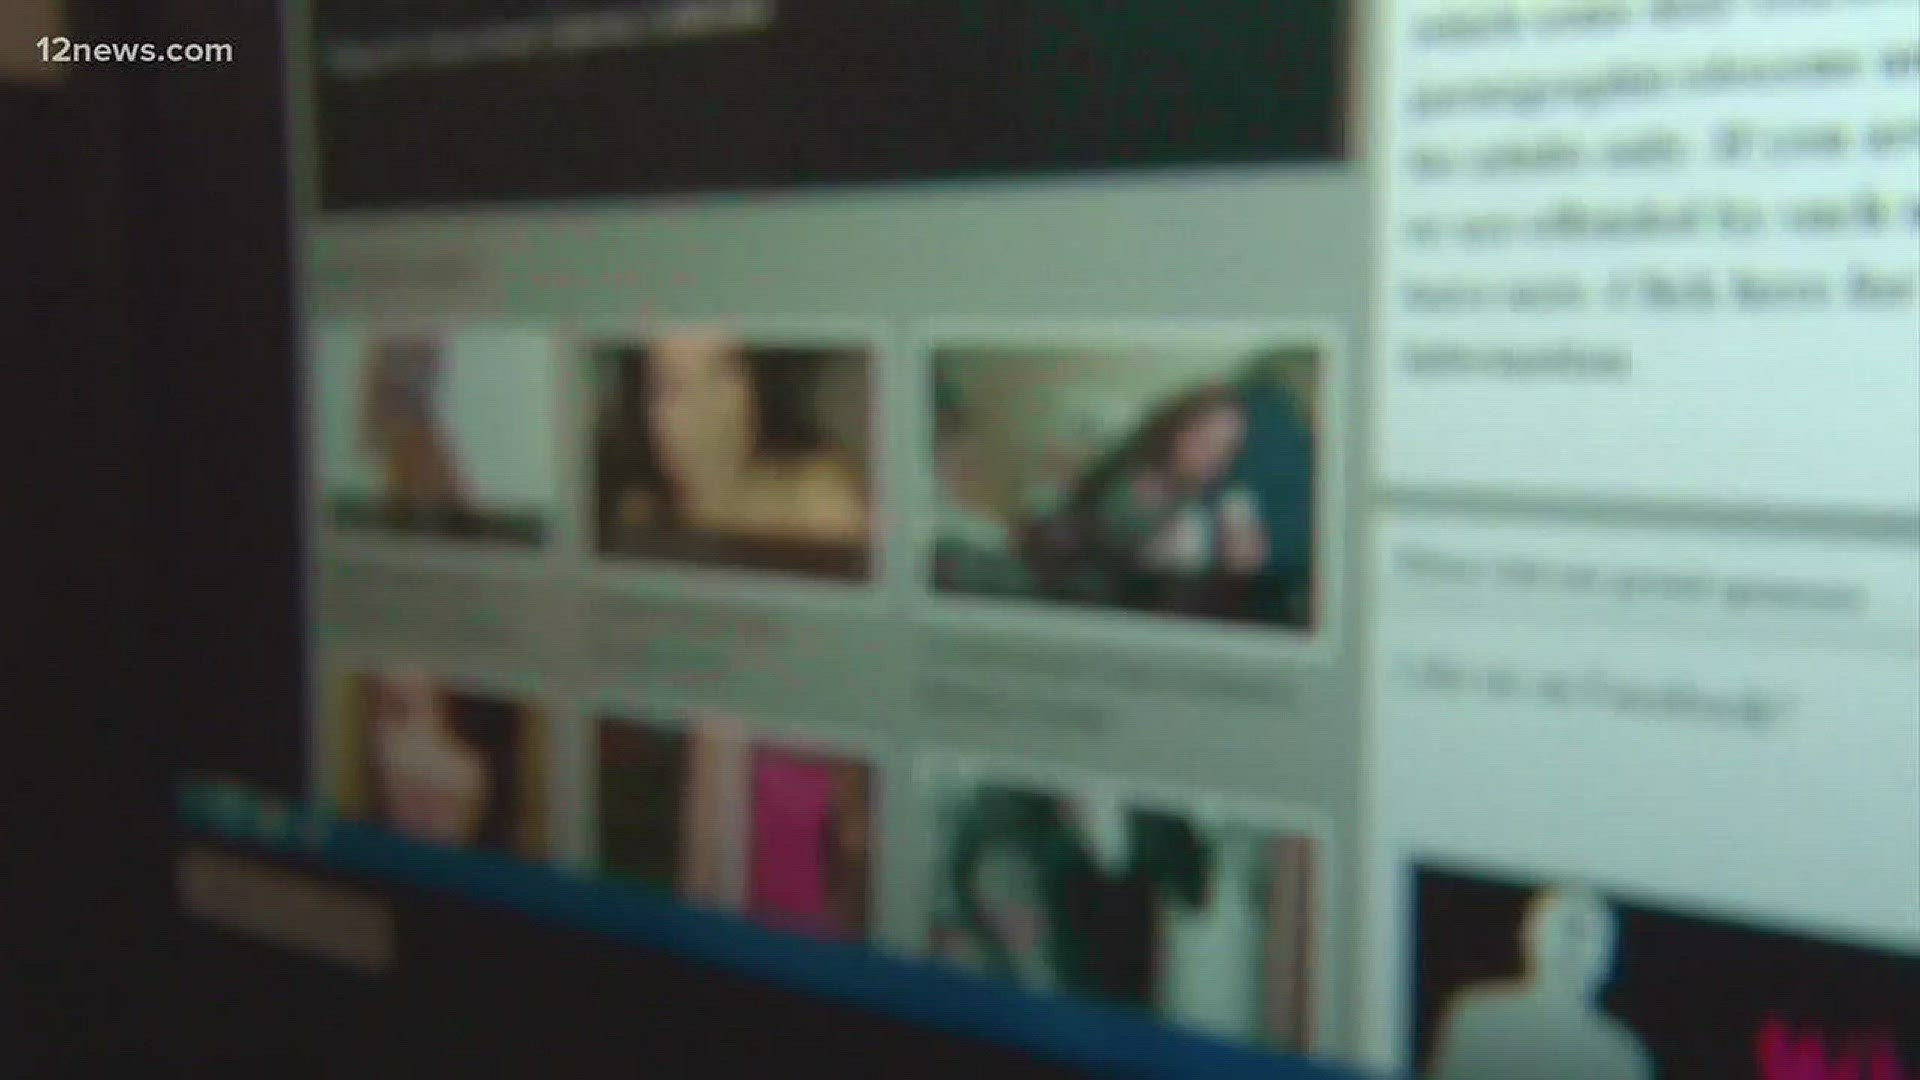 Are people allowed to access porn sites at local libraries? The answer might surprise you.